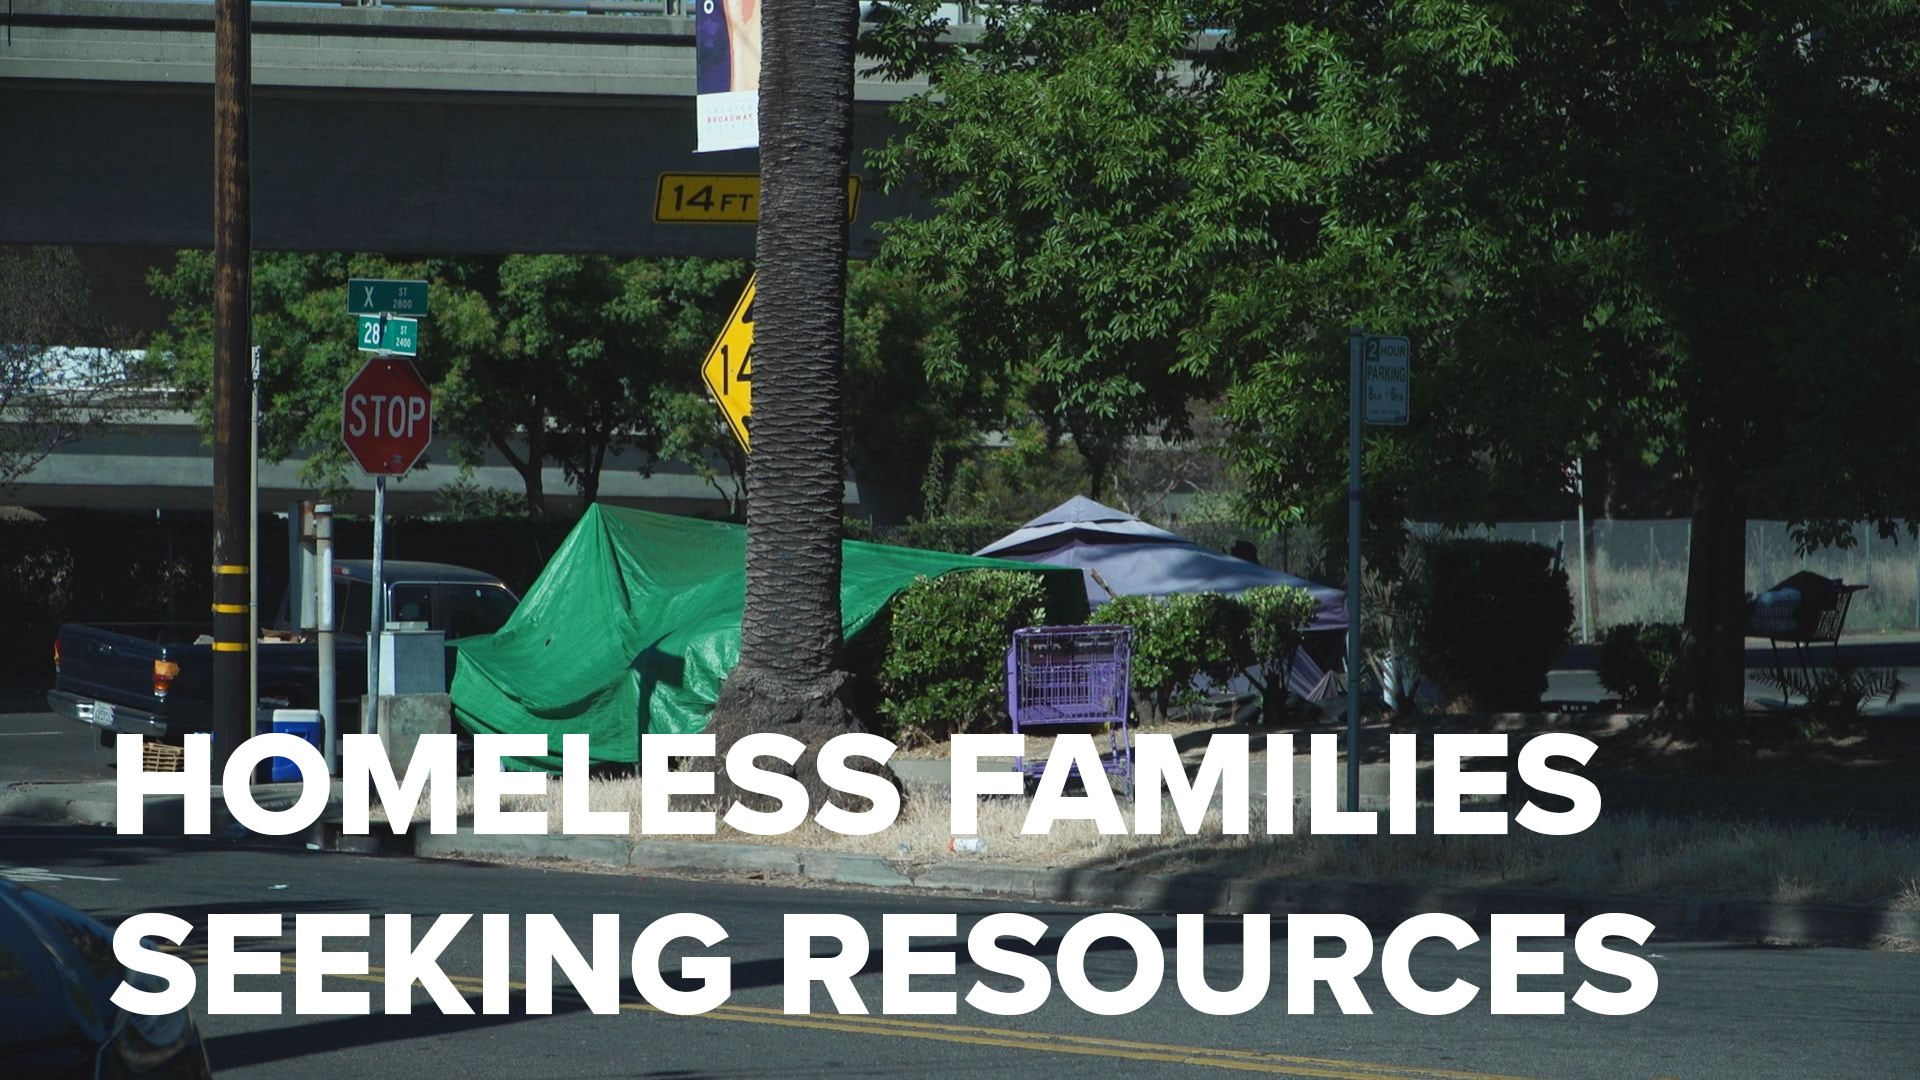 Sacramento County sees an increase in homeless families seeking resources